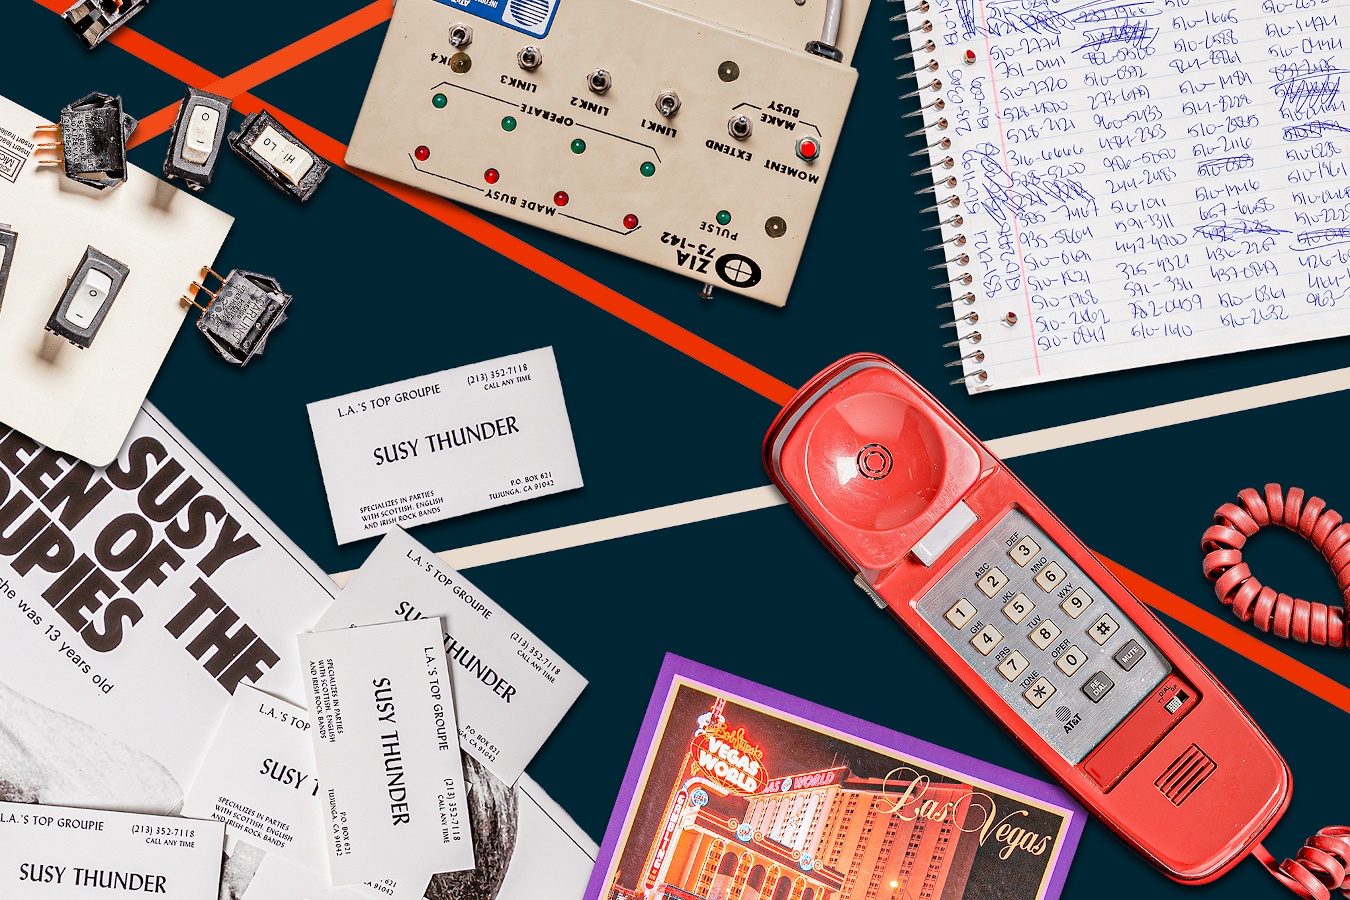 Collage header image of article by Claire L. Evans for The Verge 'Searching for Susy Thunder' depicting things like a phone handset, some kind of tone/pulse link box, a notepad with dialup numbers written on it, Vegas postcard